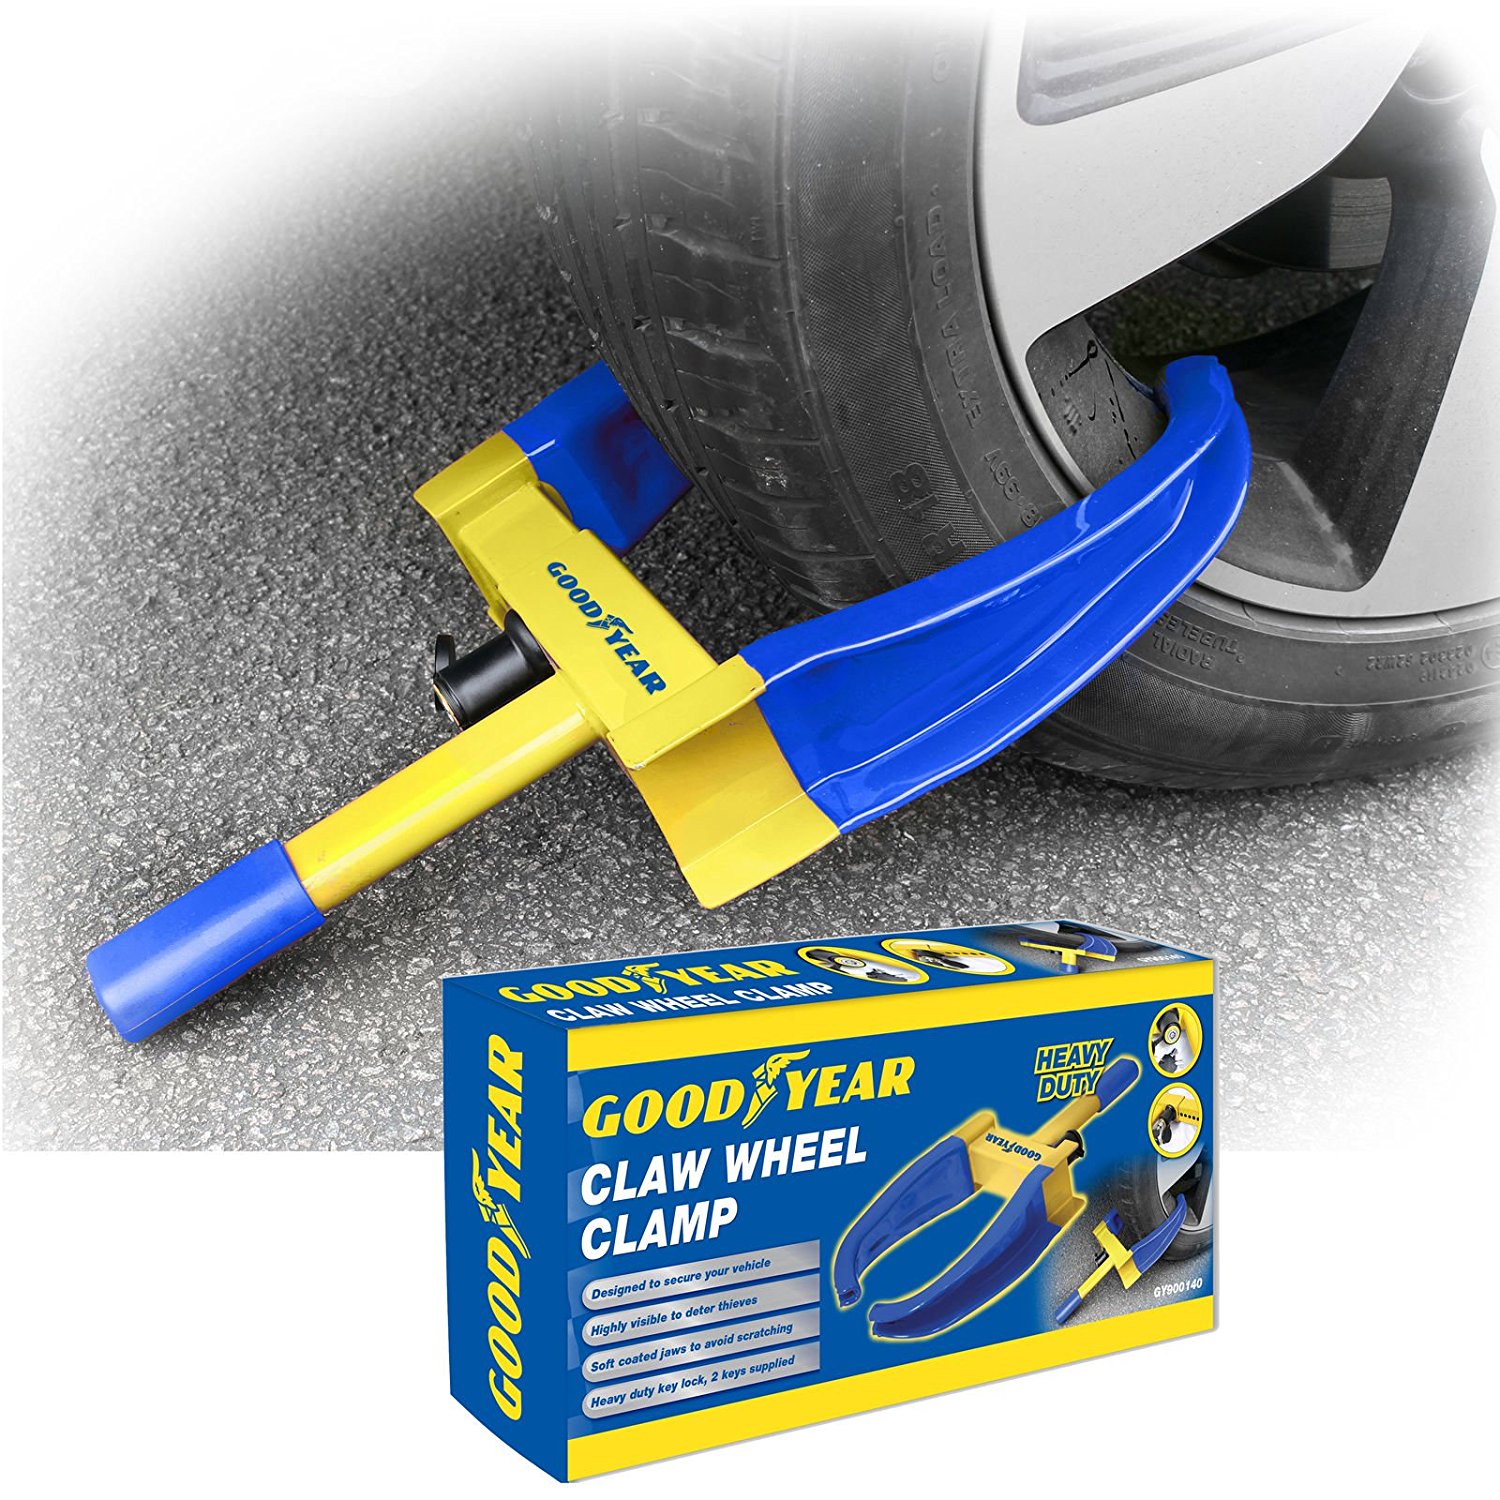 Review of Goodyear Heavy Duty Car Wheel Clamp